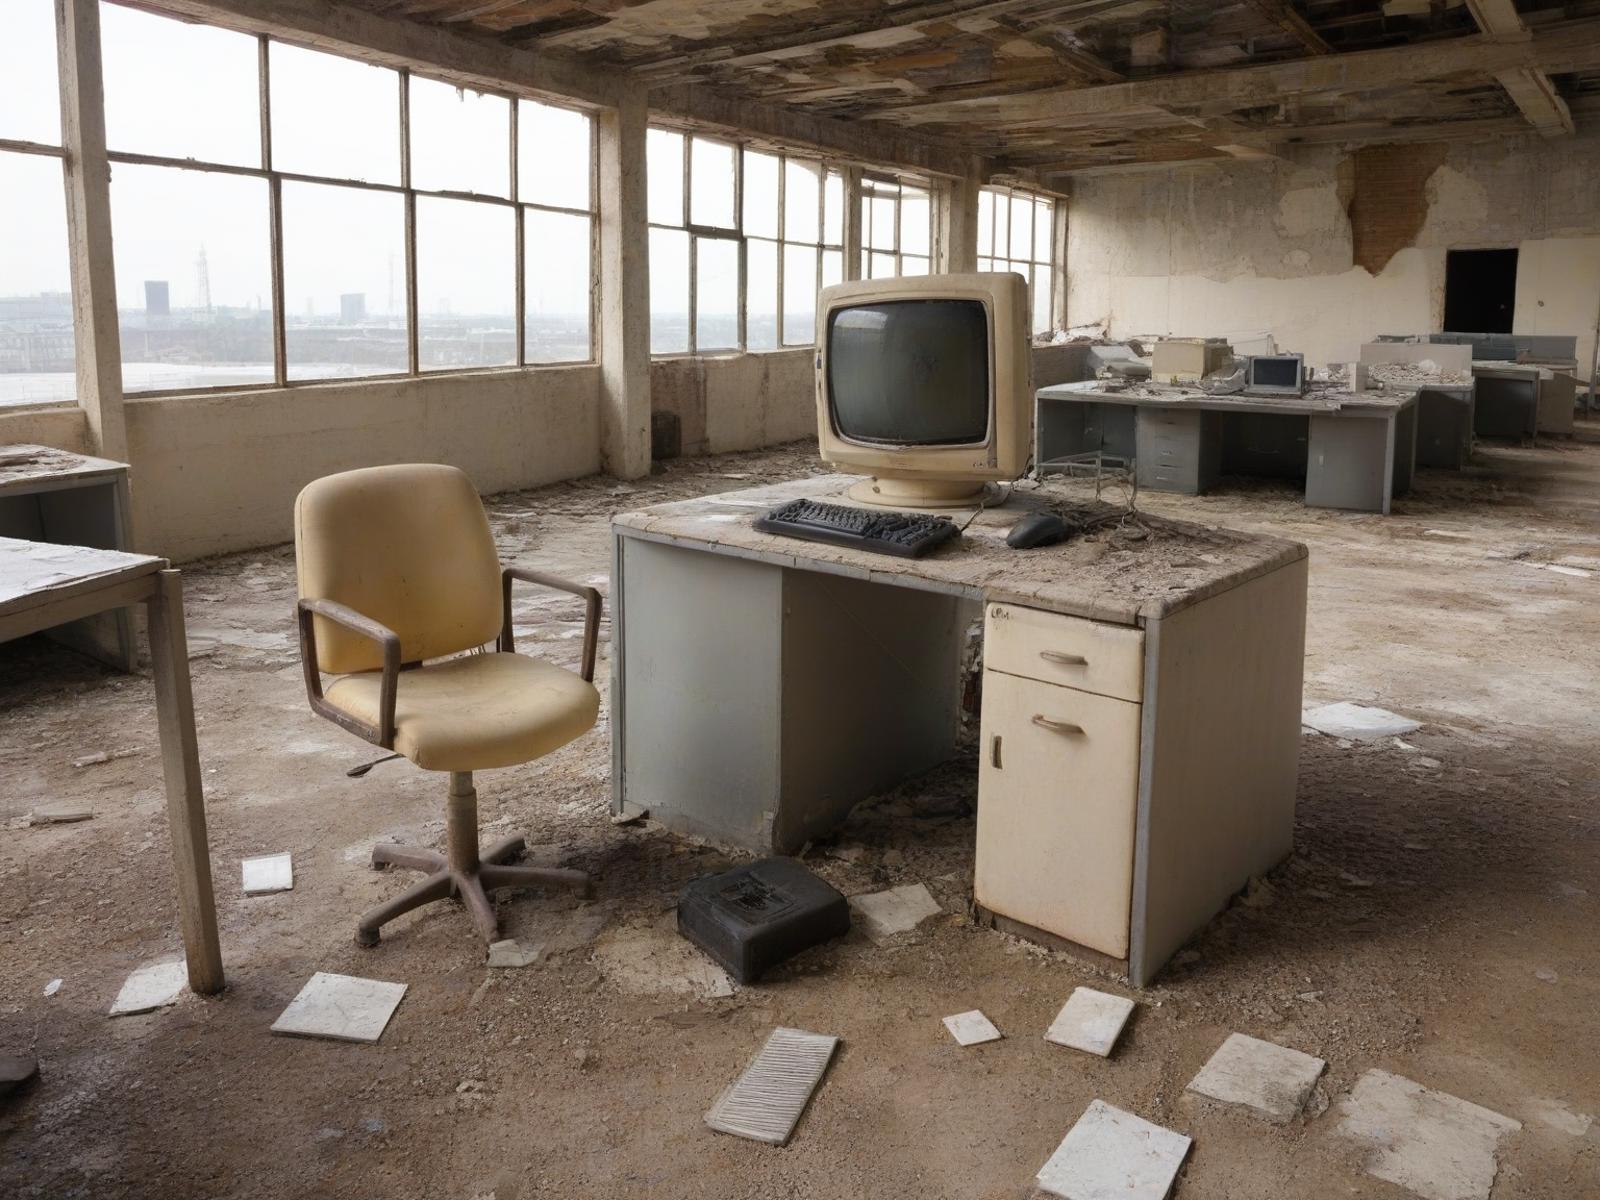 An old and dirty computer desk with a chair, keyboard, and a TV screen.